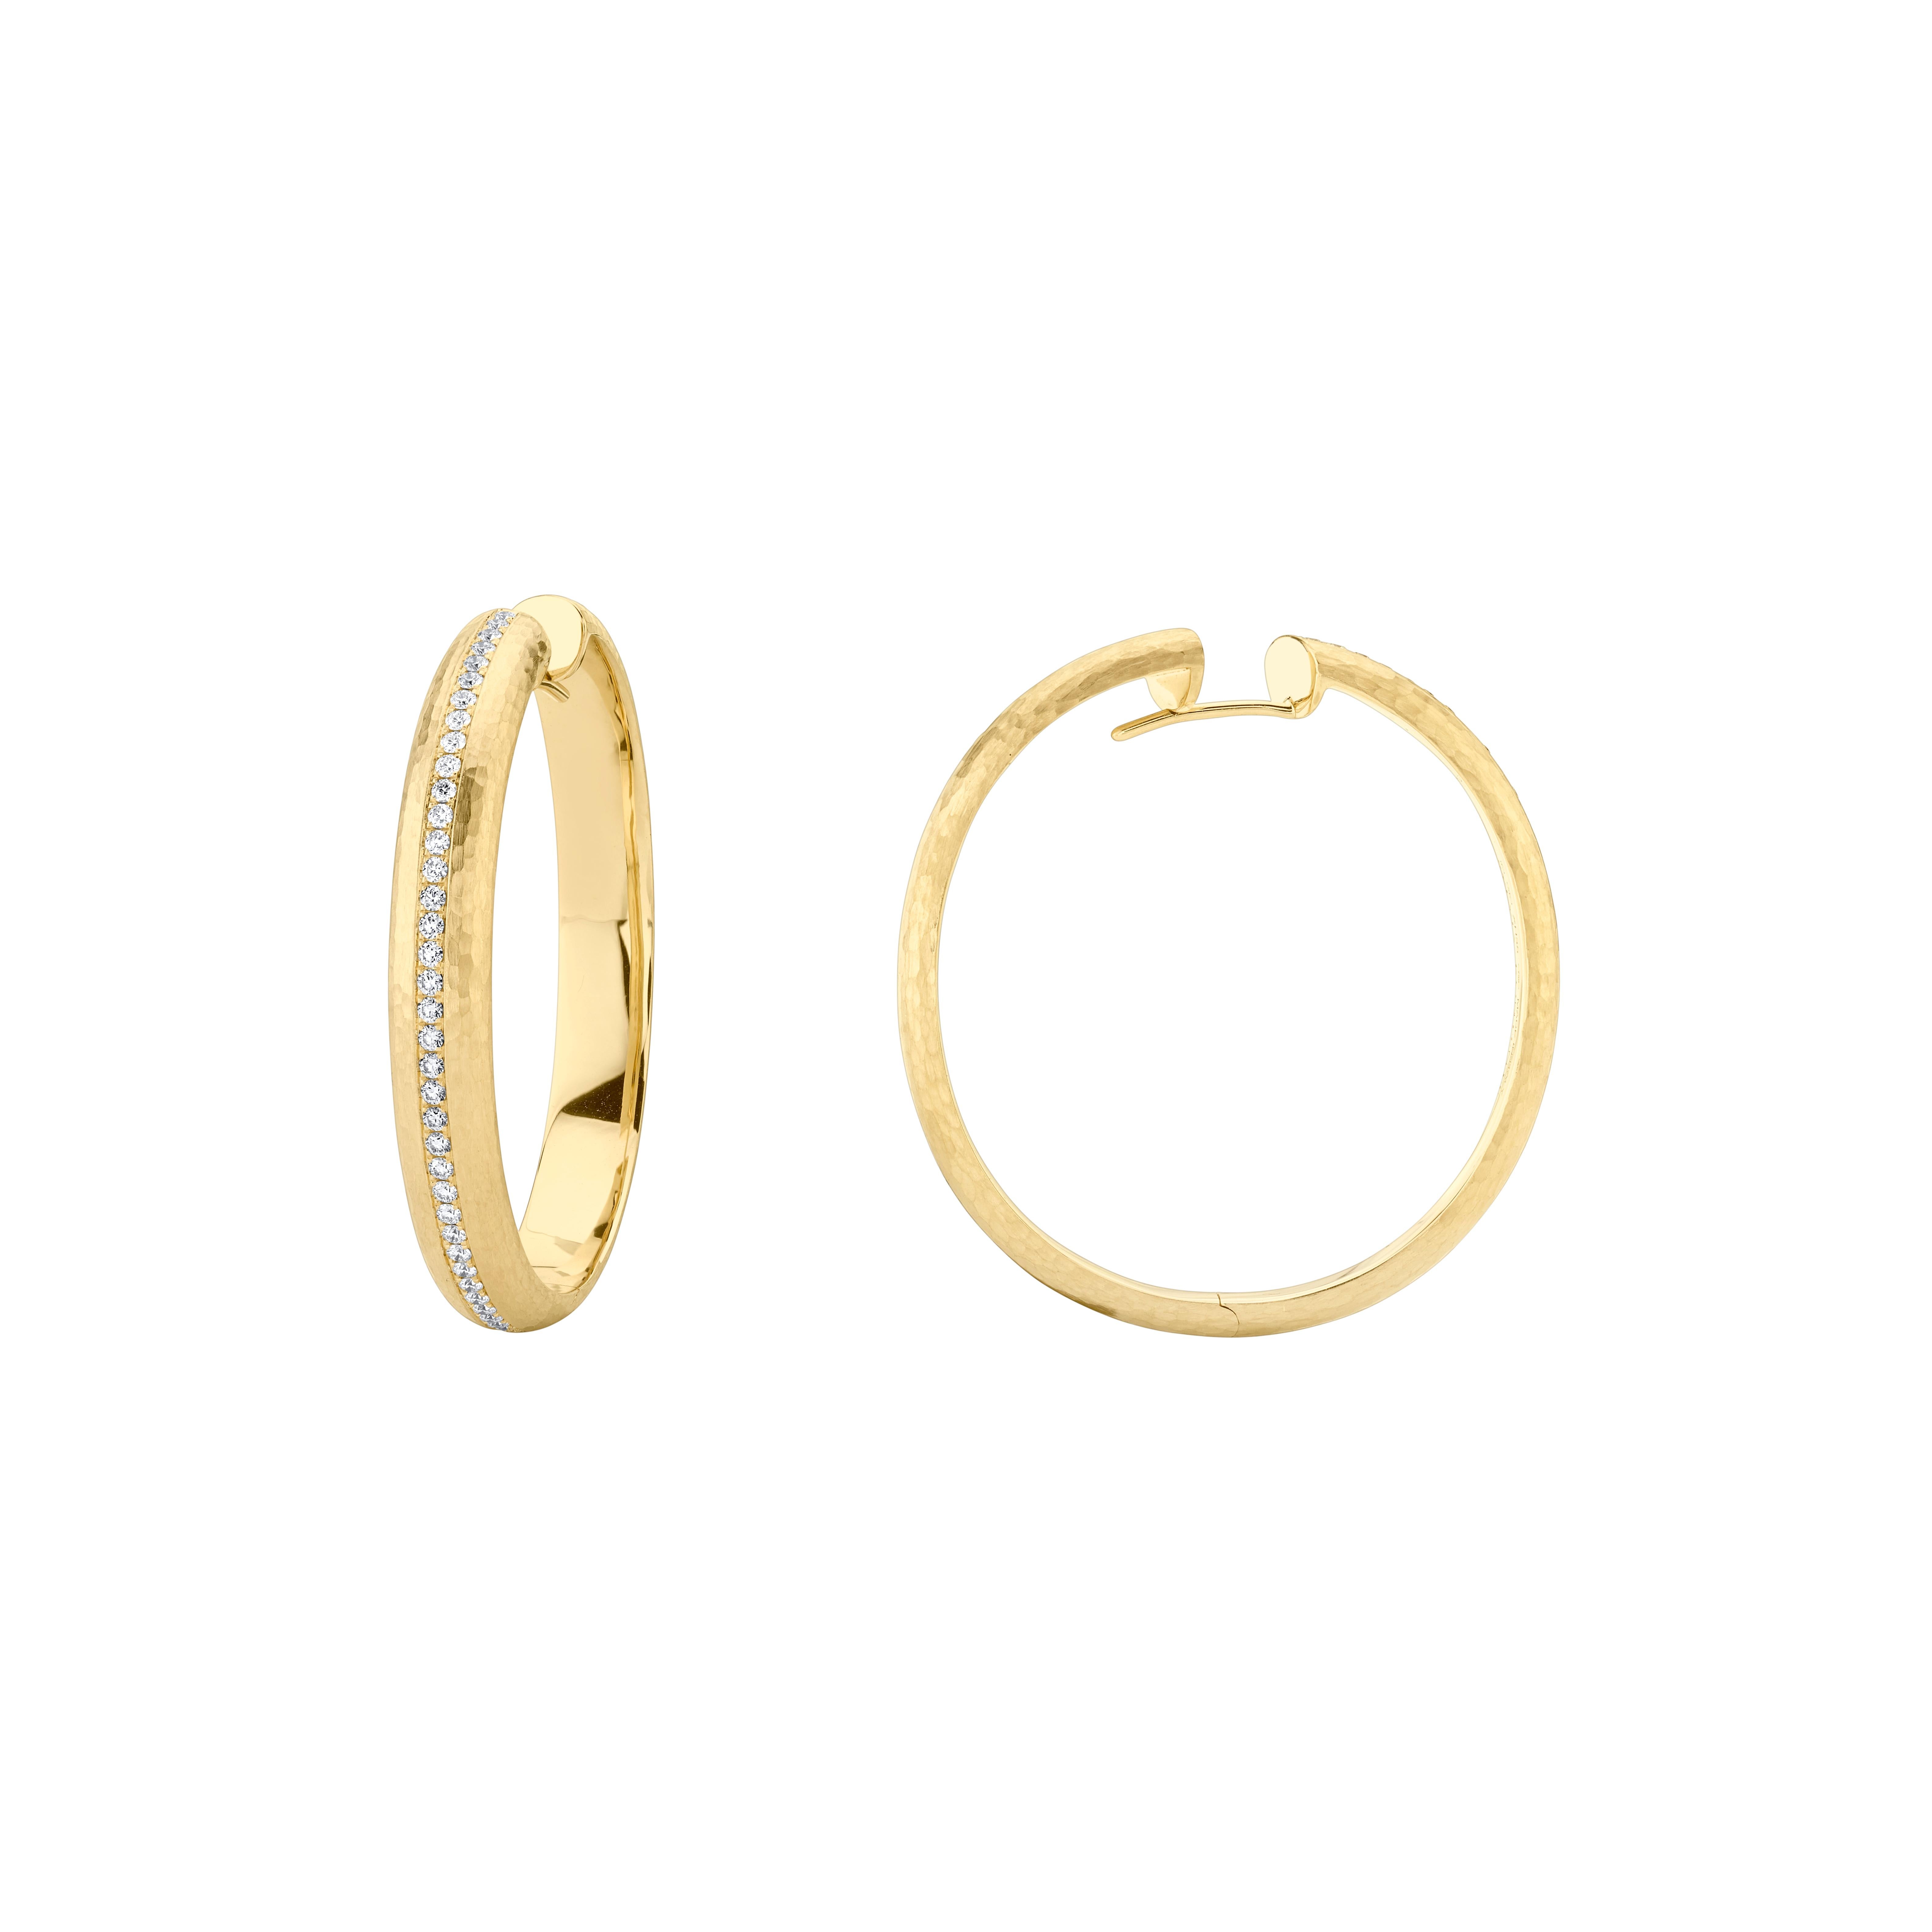 Style #: XH35H.
SYLVIA KONTENTE  18K Yellow gold diamond hoop earrings with hammered finish.
Precision-cut, round brilliant diamonds.
Diamond total weight: 0.71ct tw.
Diamond color/clarity: DEF/VVS VS.
Hammered finish.
High-end construction.
Size: